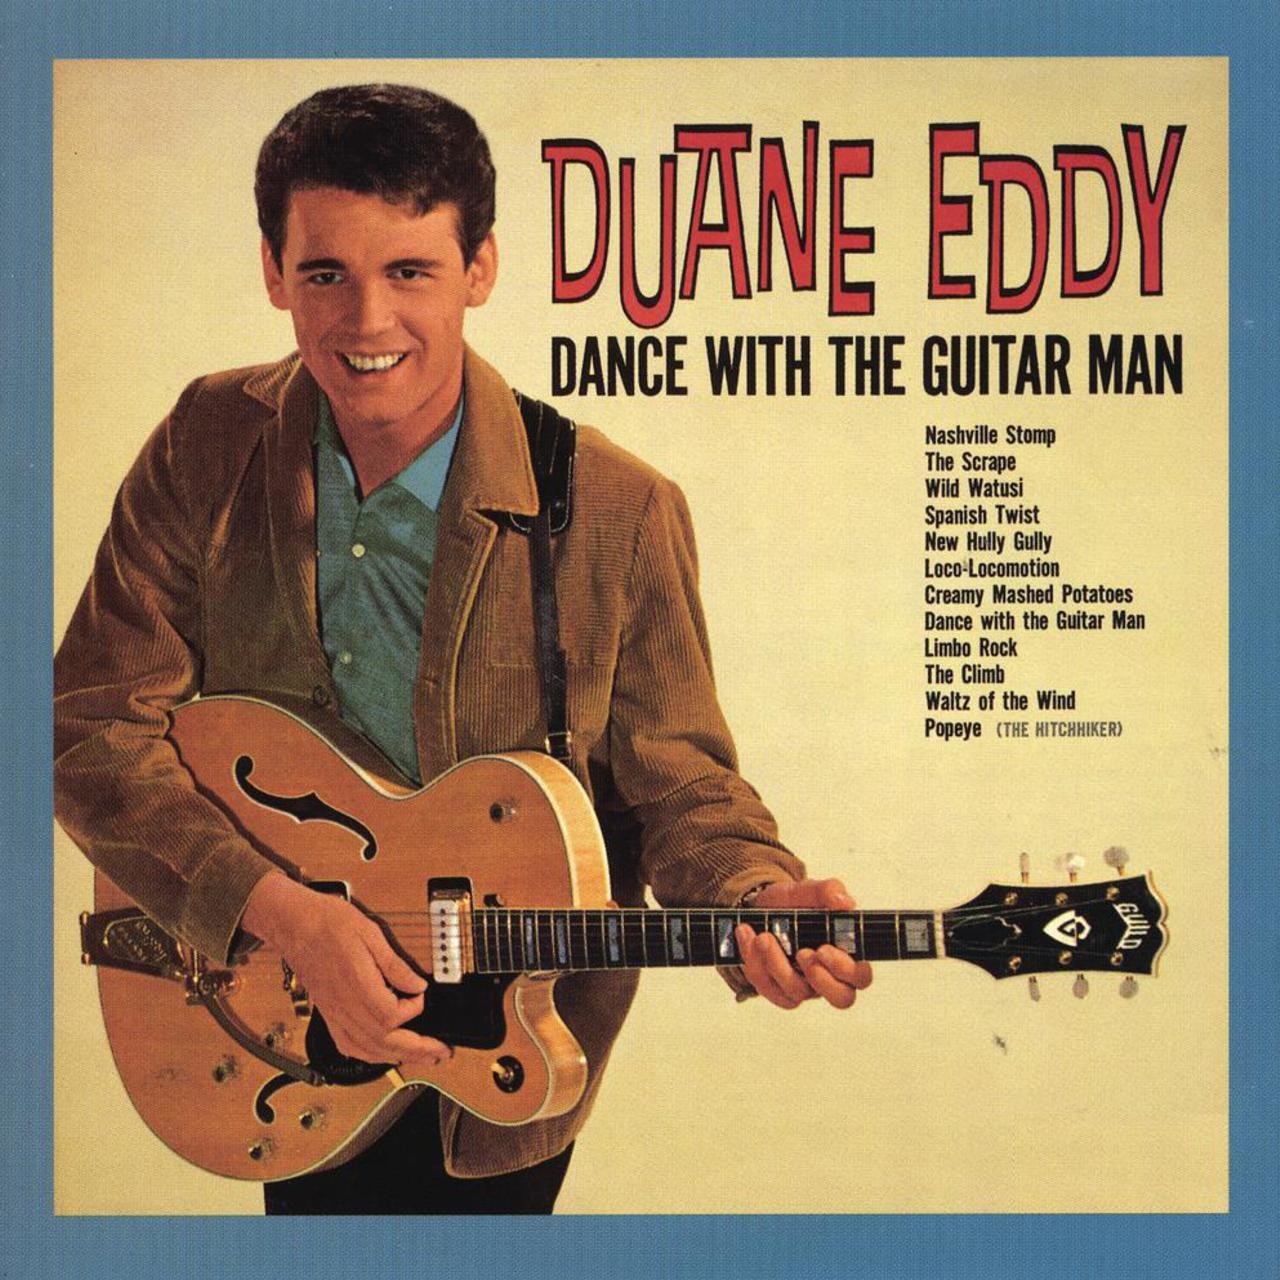 Duane Eddy - Dance With the Guitar Man